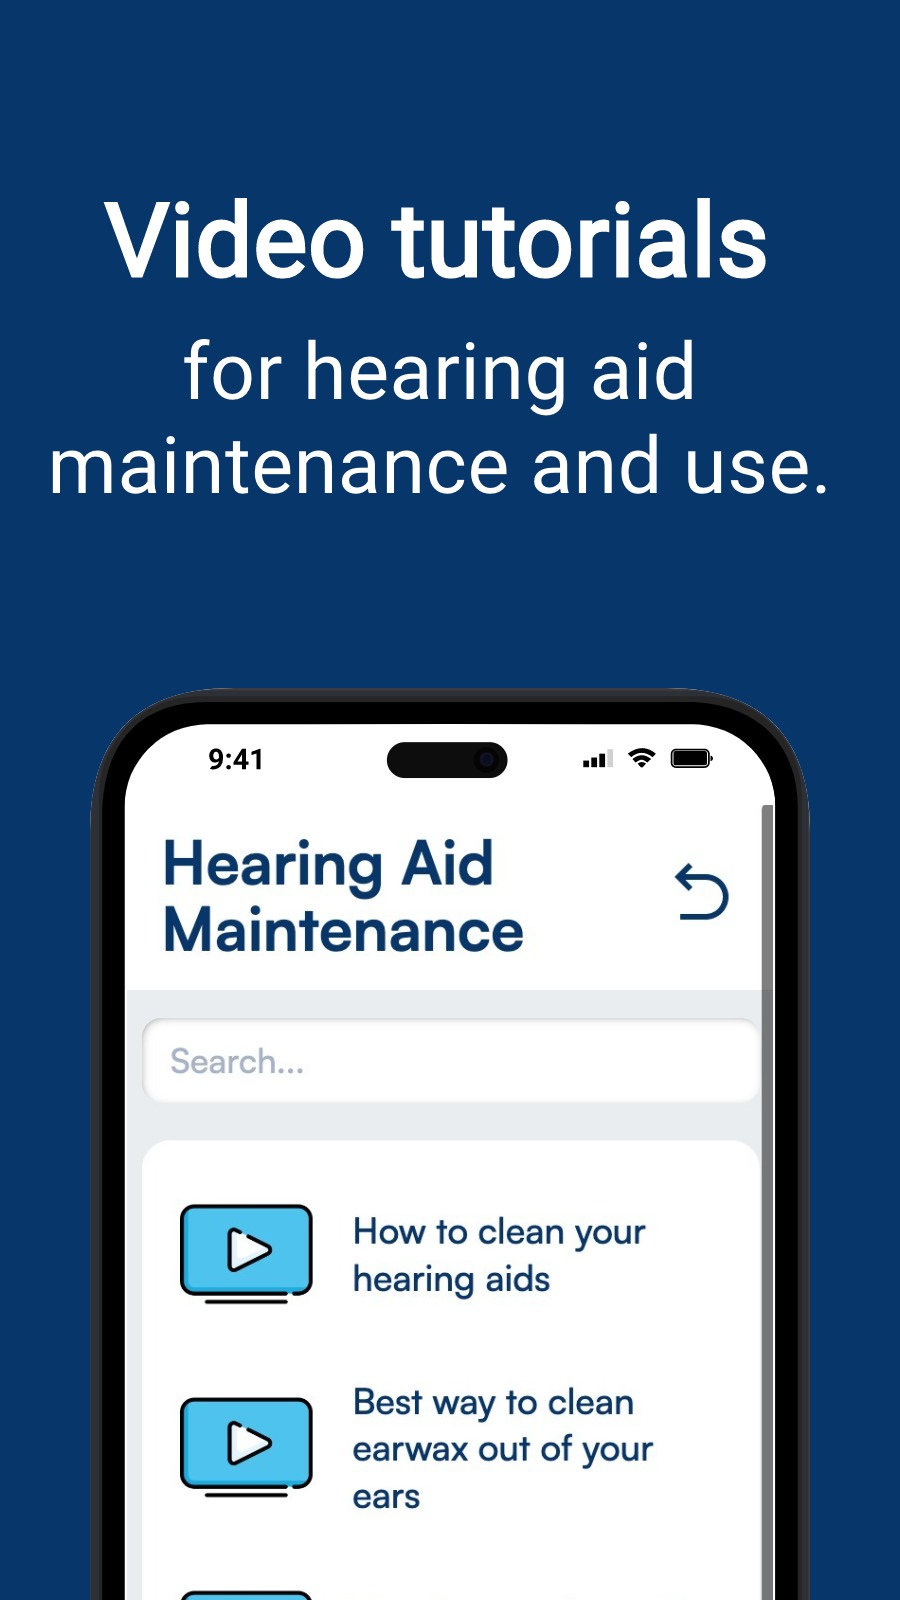 Video tutorials - for hearing aid maintenance and use.